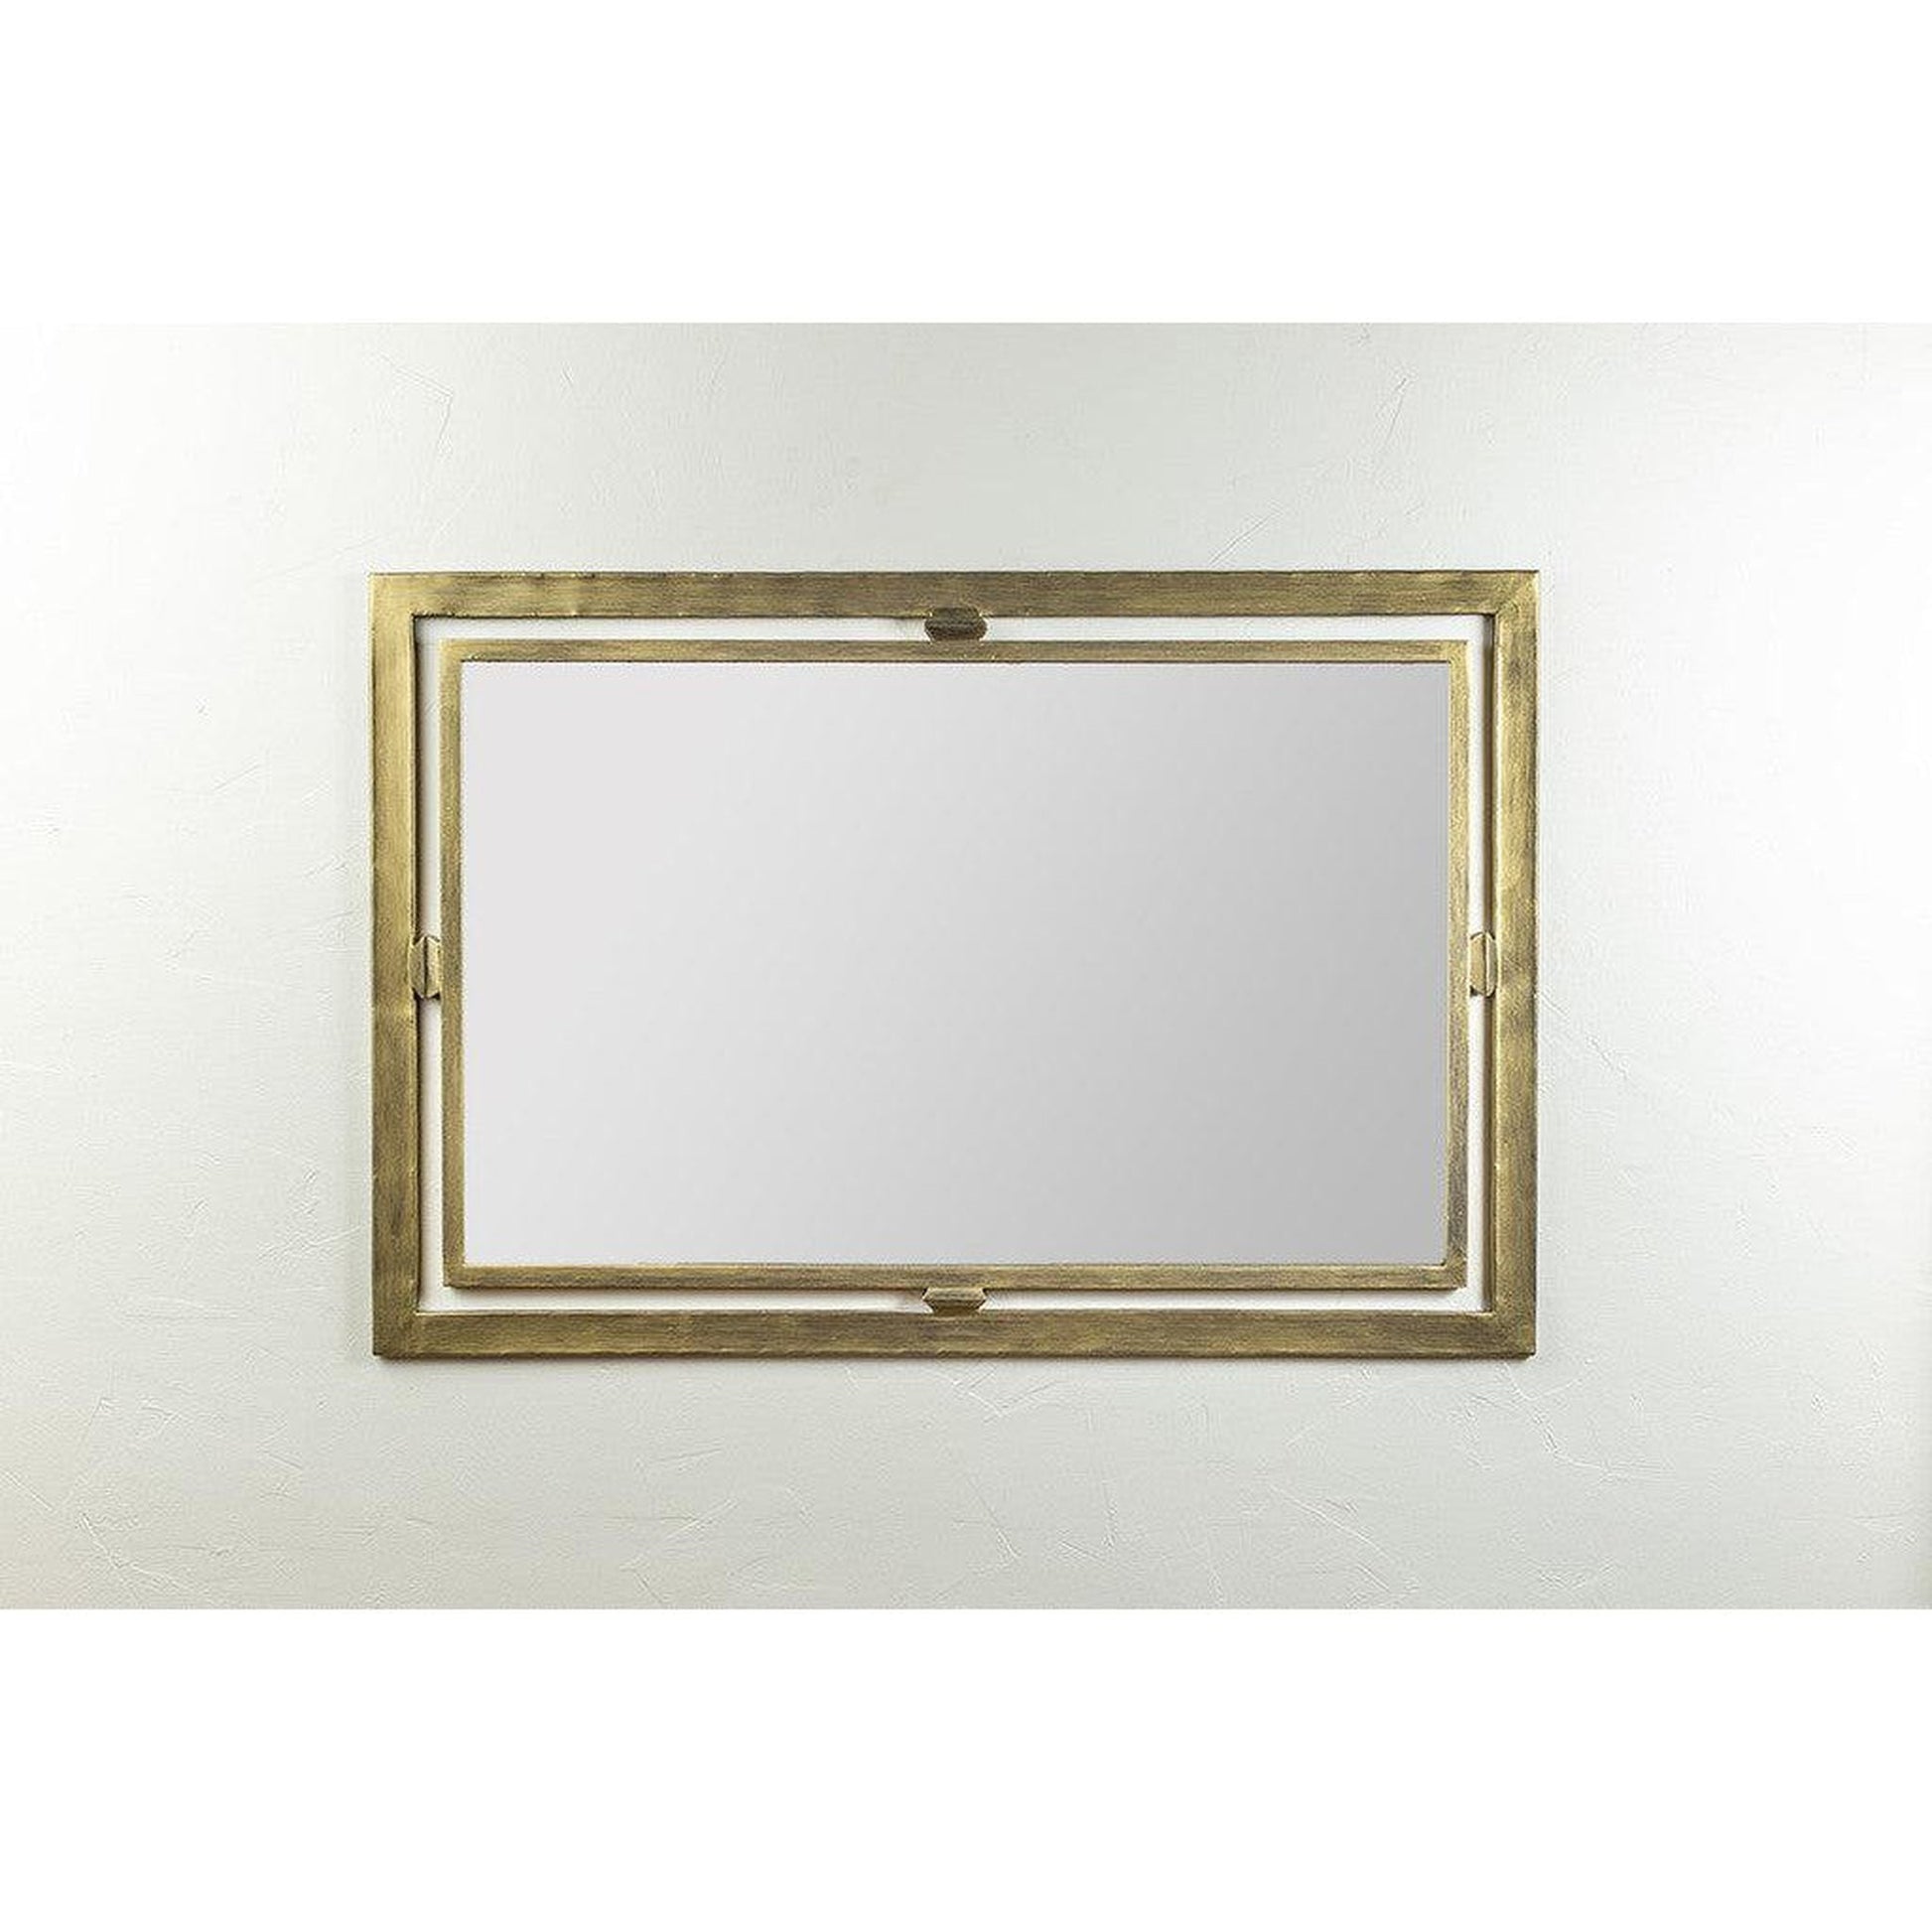 Stone County Ironworks Forest Hill 27" x 40" Large Chalk White Iron Wall Mirror With Gold Iron Accent